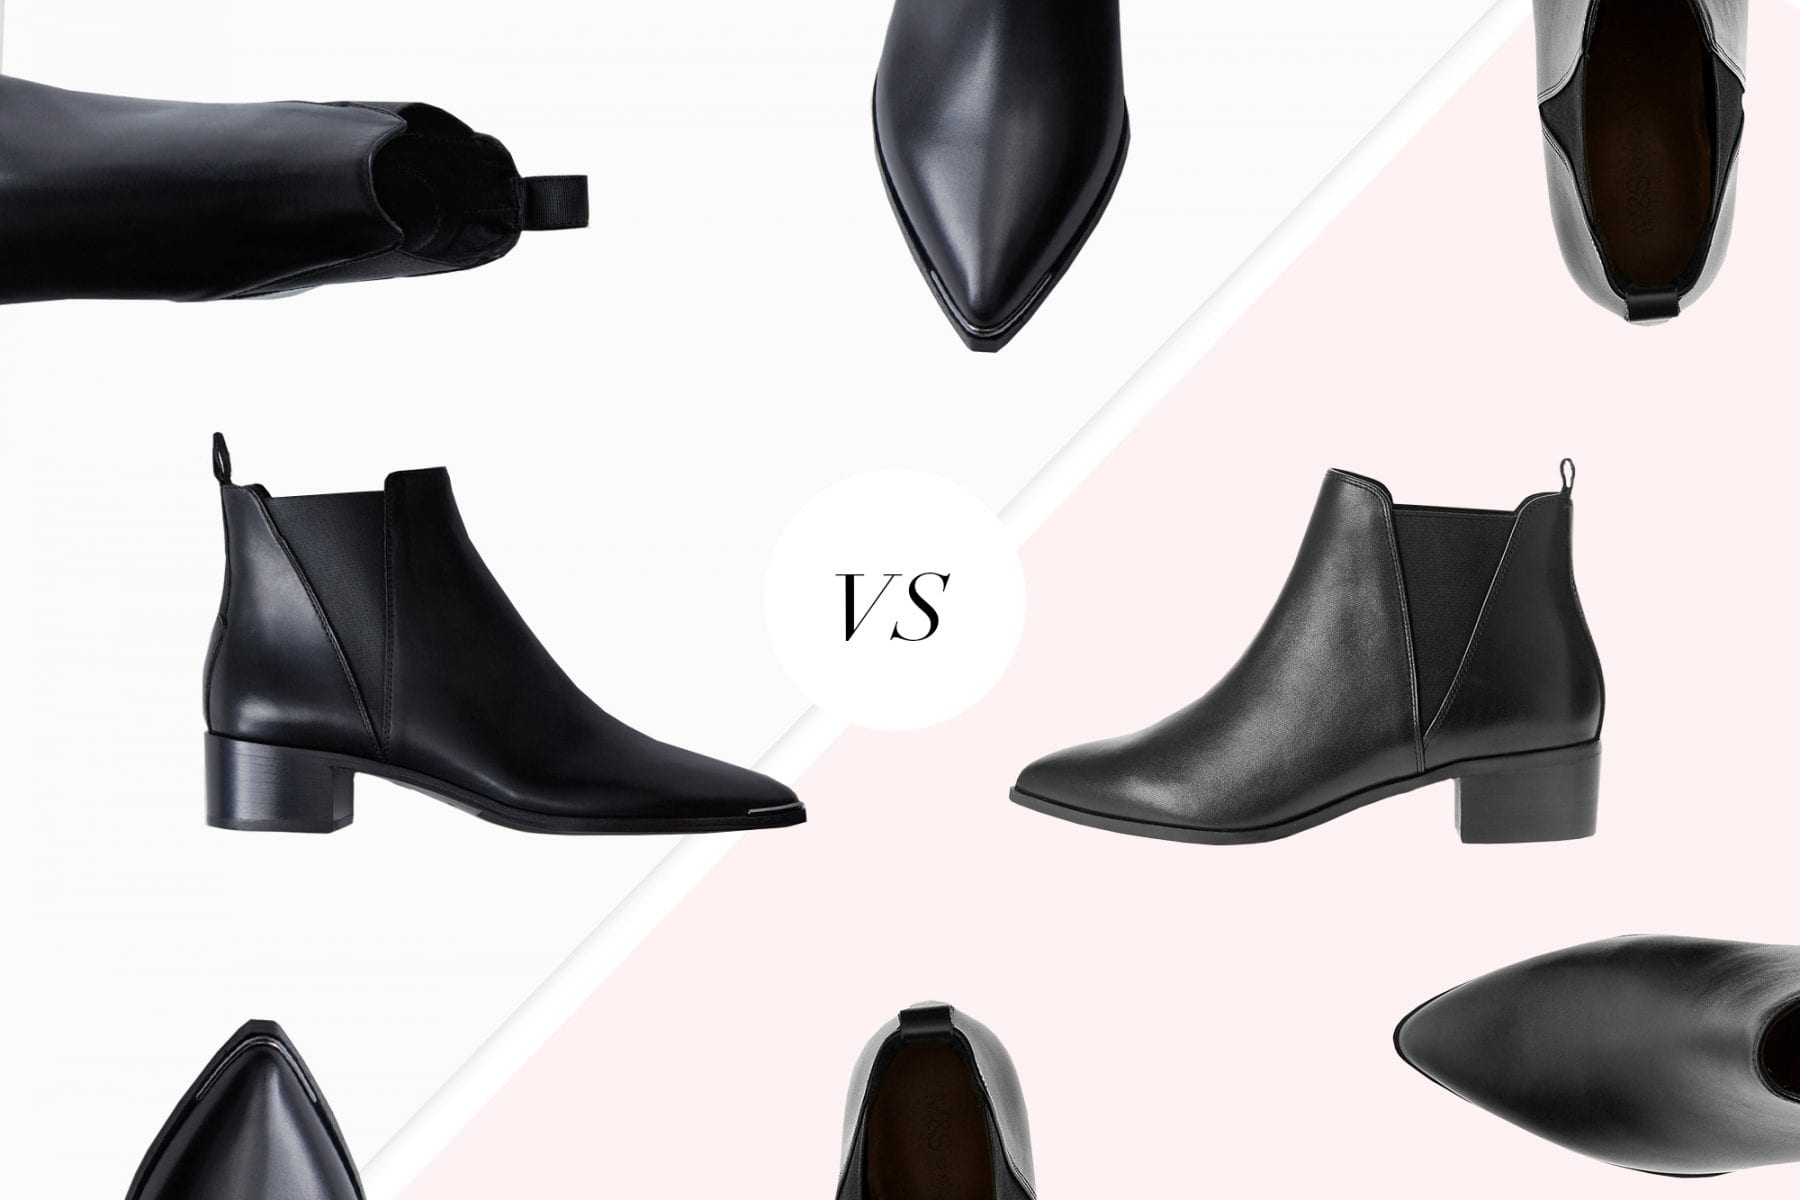 Save Vs Splurge: The £59 Take On Acne’s Chelsea Boots